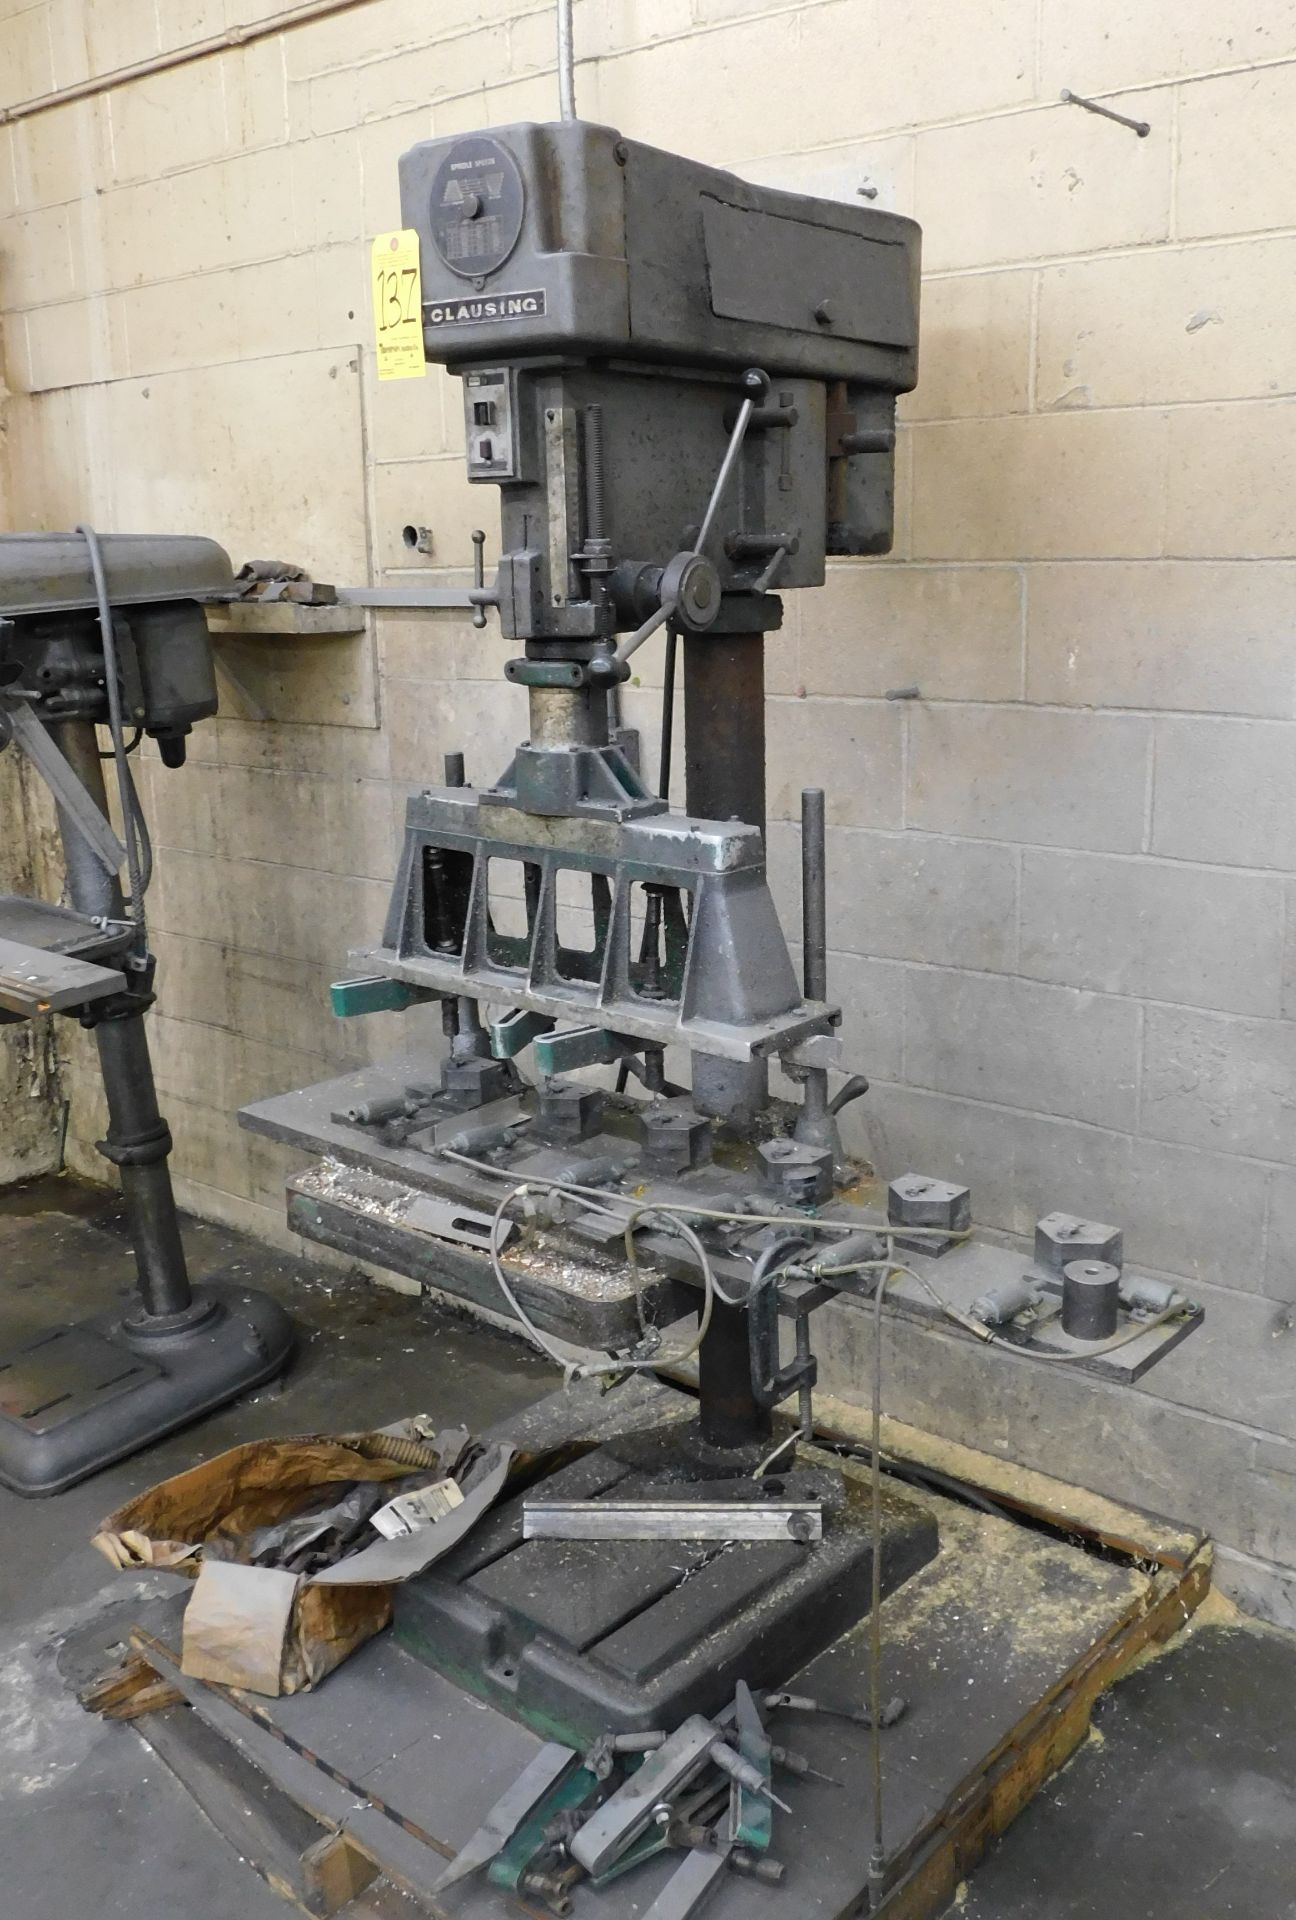 Clausing Model 2234 15" Single Spindle Drill Press, s/n 109205, with Commander Drill Head